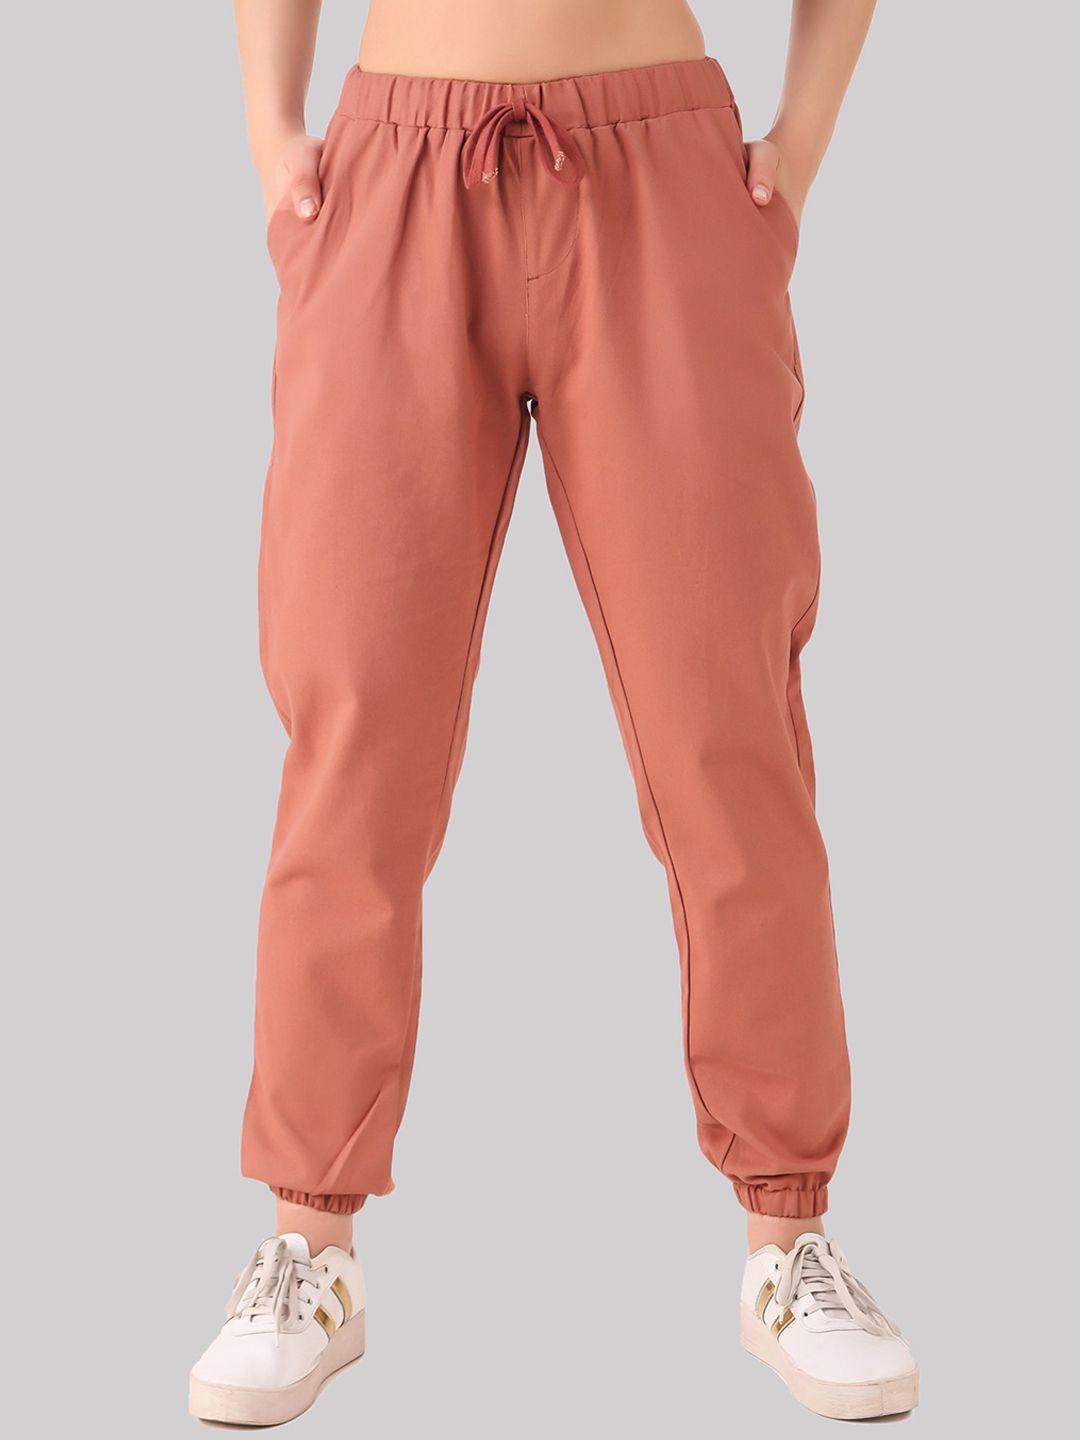 q-rious women red cotton twill regular fit joggers trousers